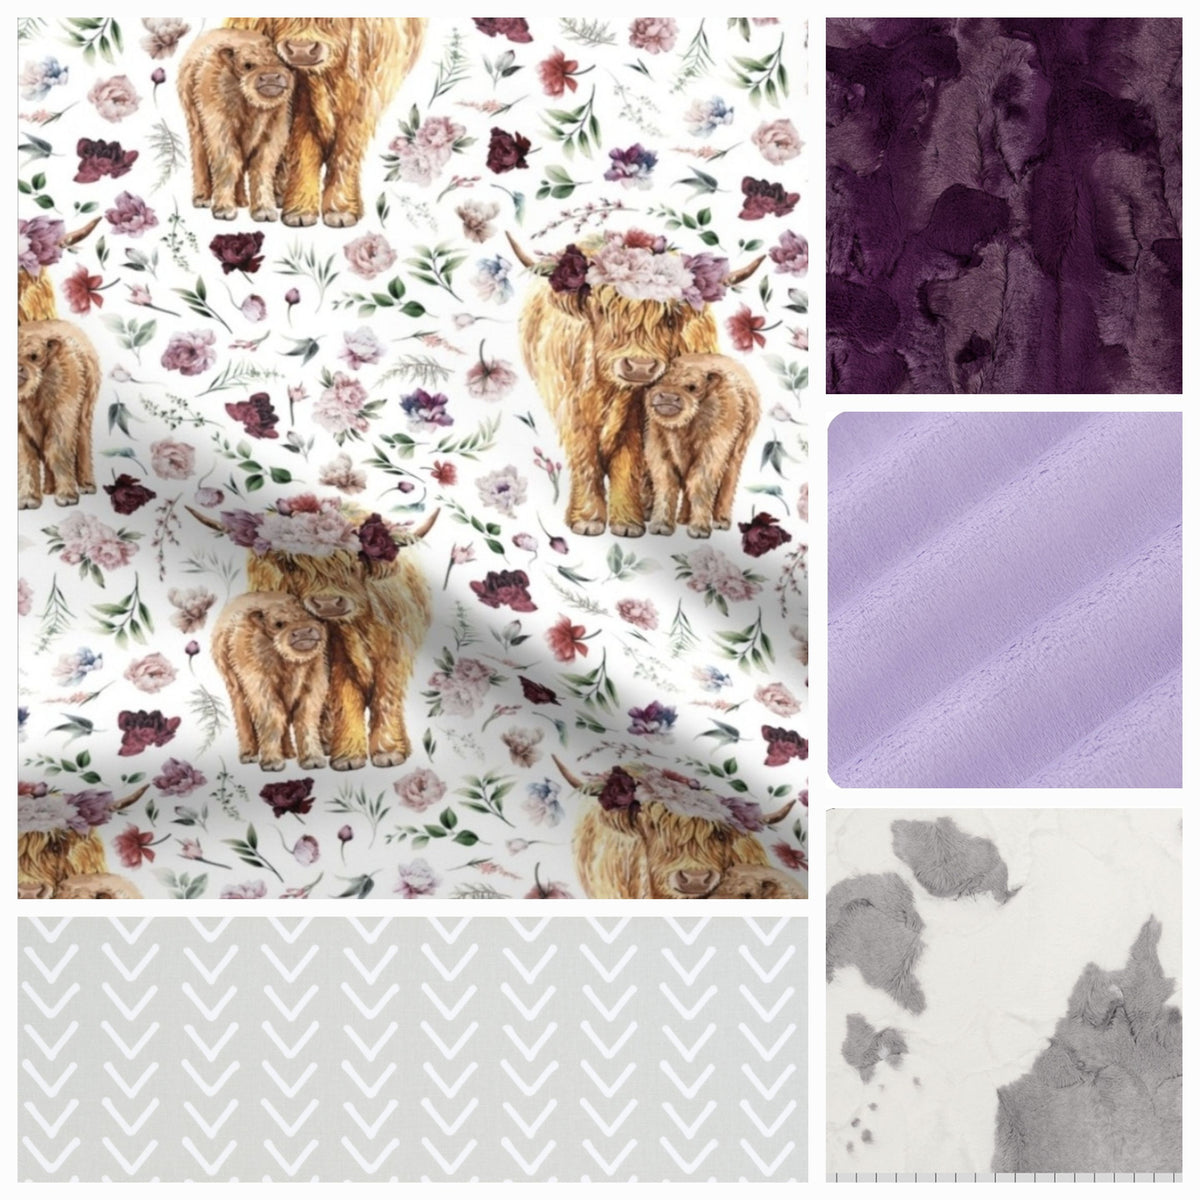 New Release Girl Crib Bedding- Dusty Lilac Floral Highland Cows Baby Bedding Collection - DBC Baby Bedding Co 